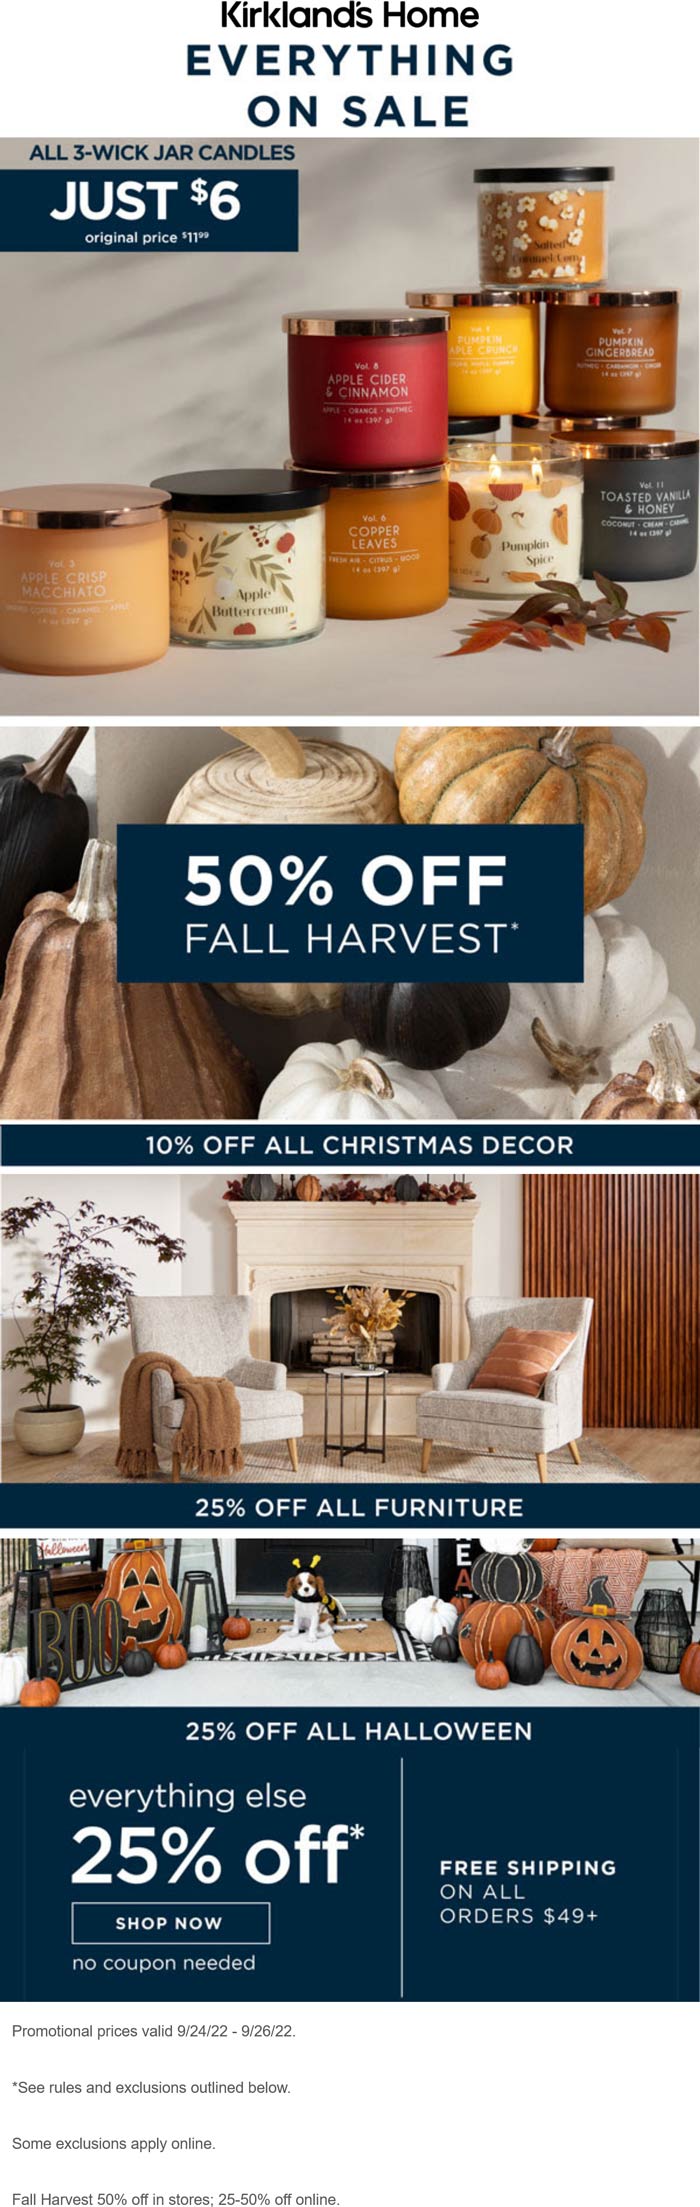 Kirklands Home stores Coupon  25% off everything & more at Kirklands Home, ditto online #kirklandshome 